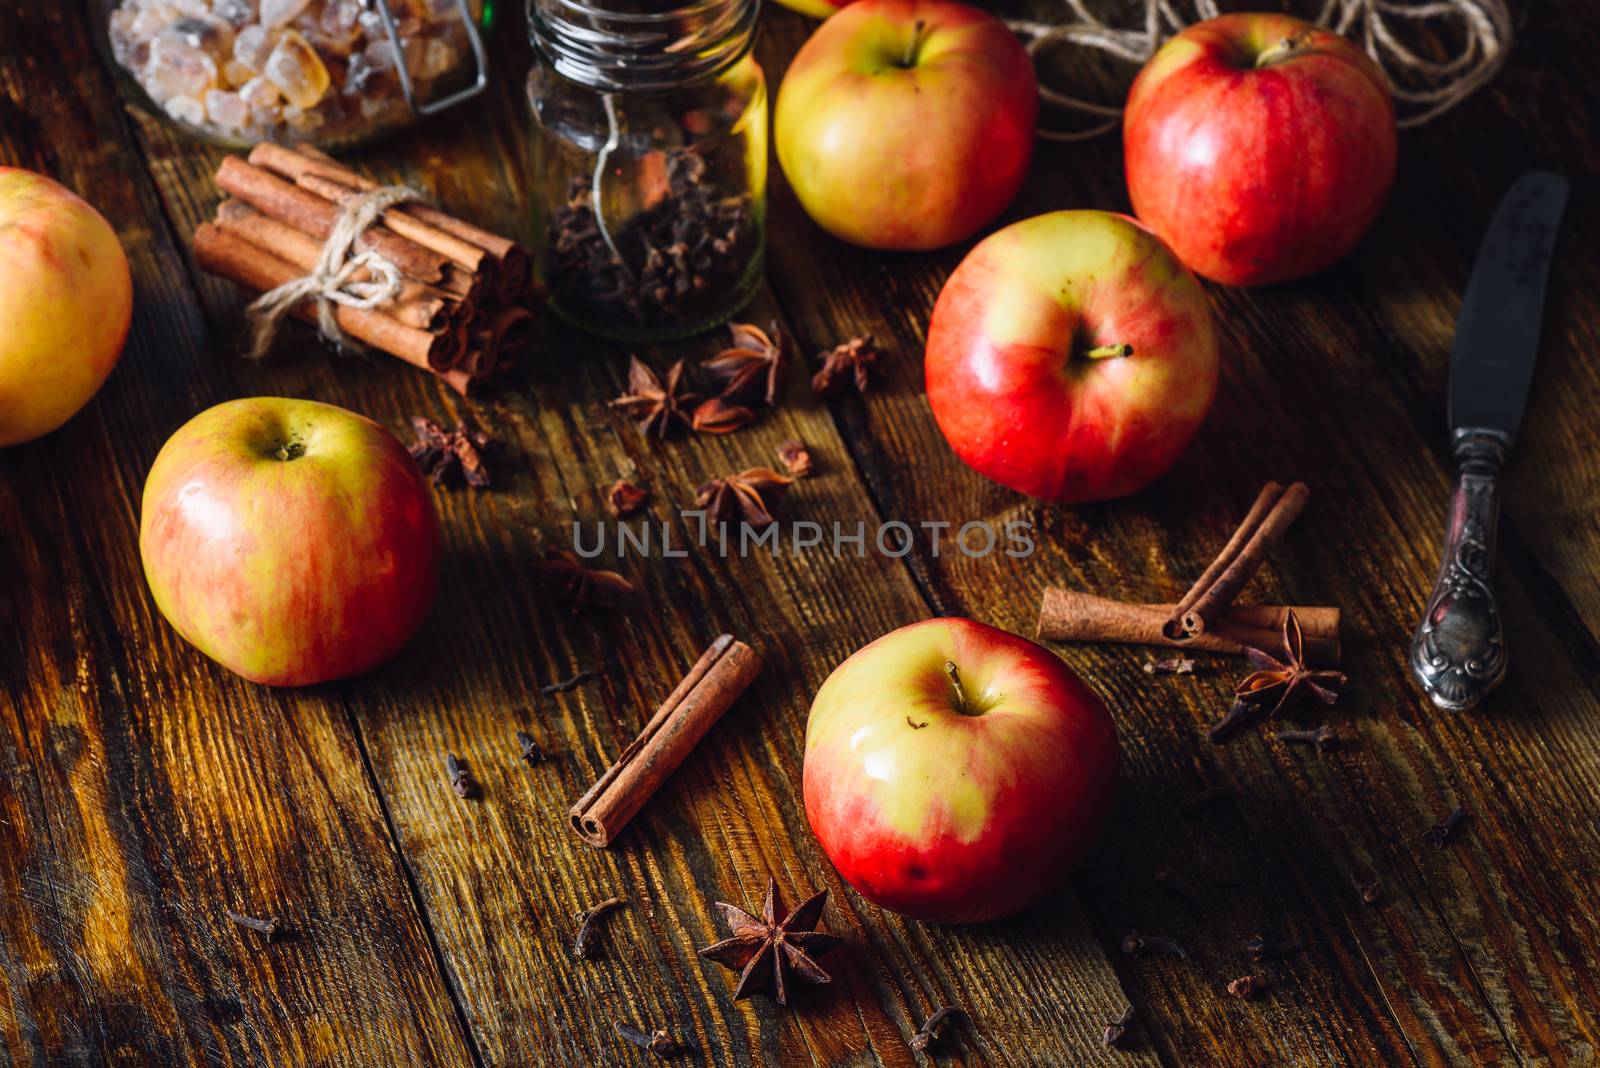 Red Apples with Different Spices for Cooking Apple Pie.